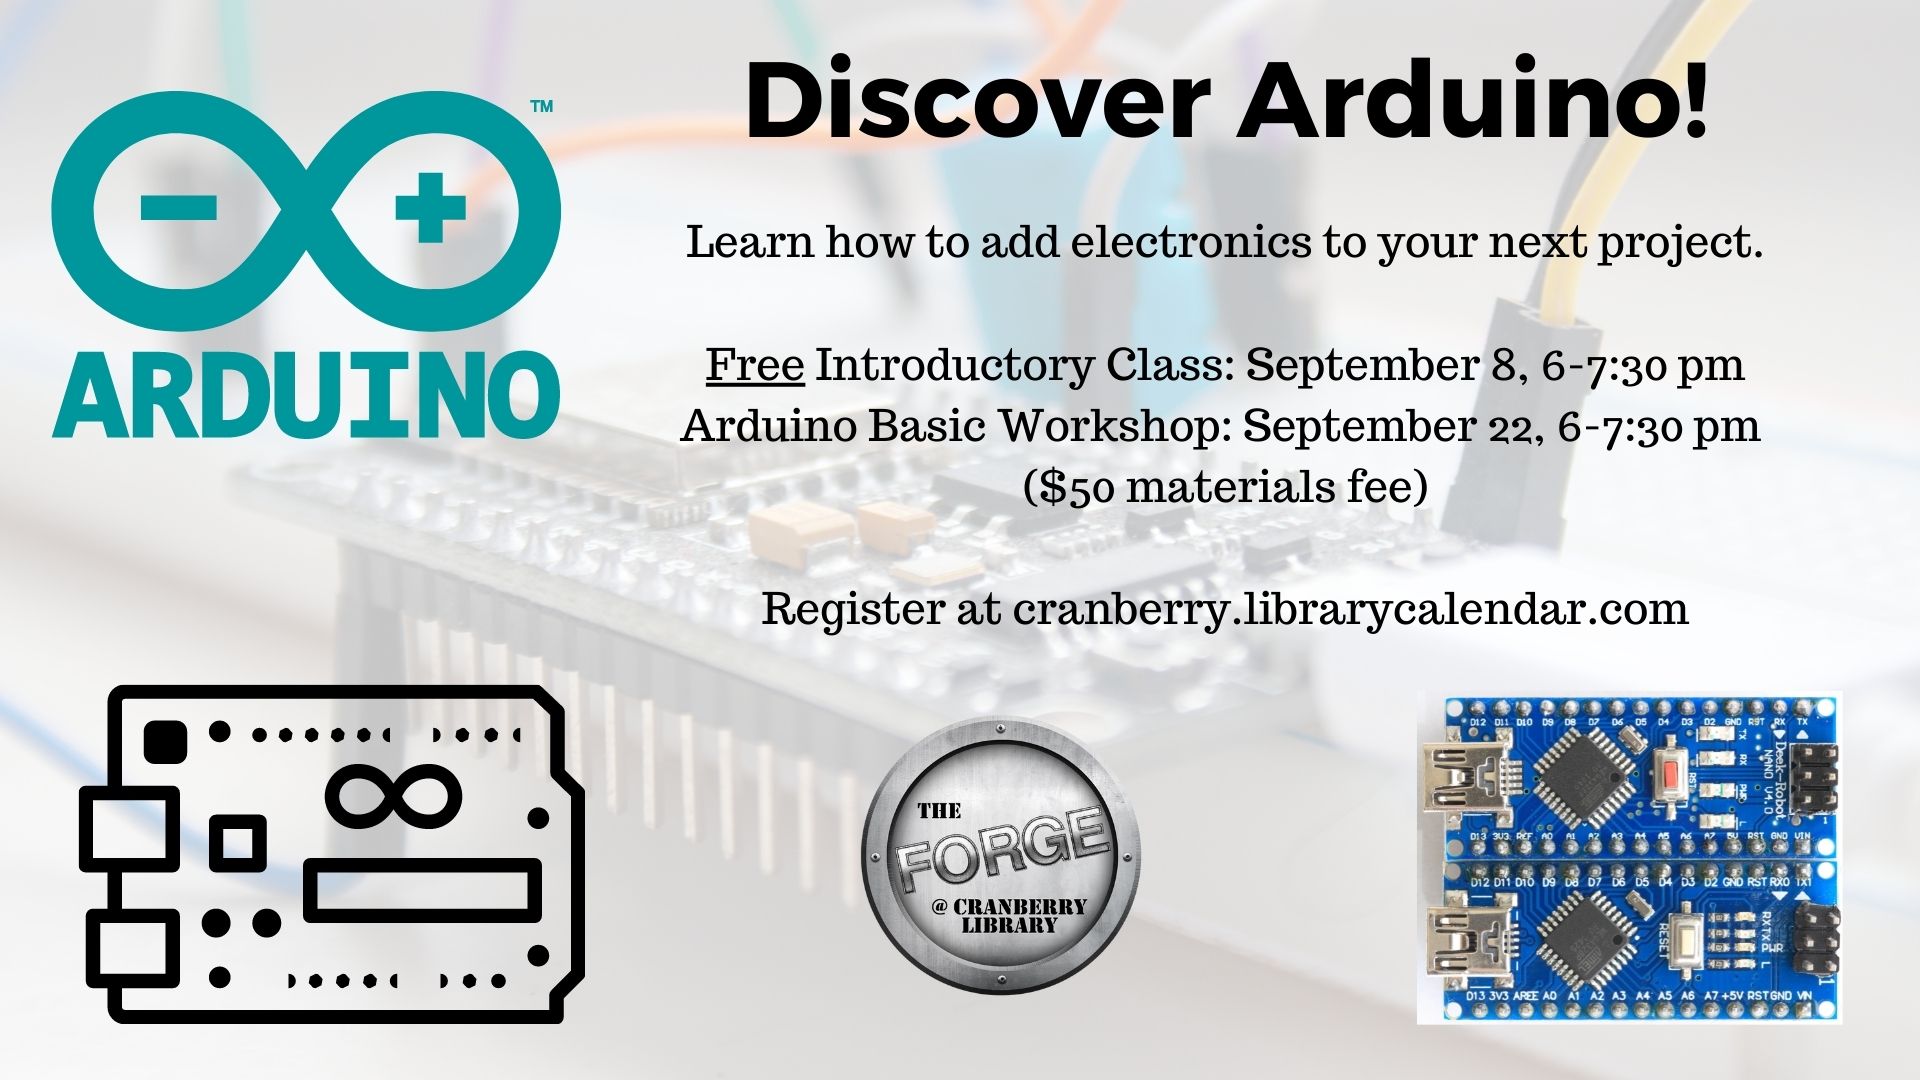 Flyer for Arduino classes in The Forge